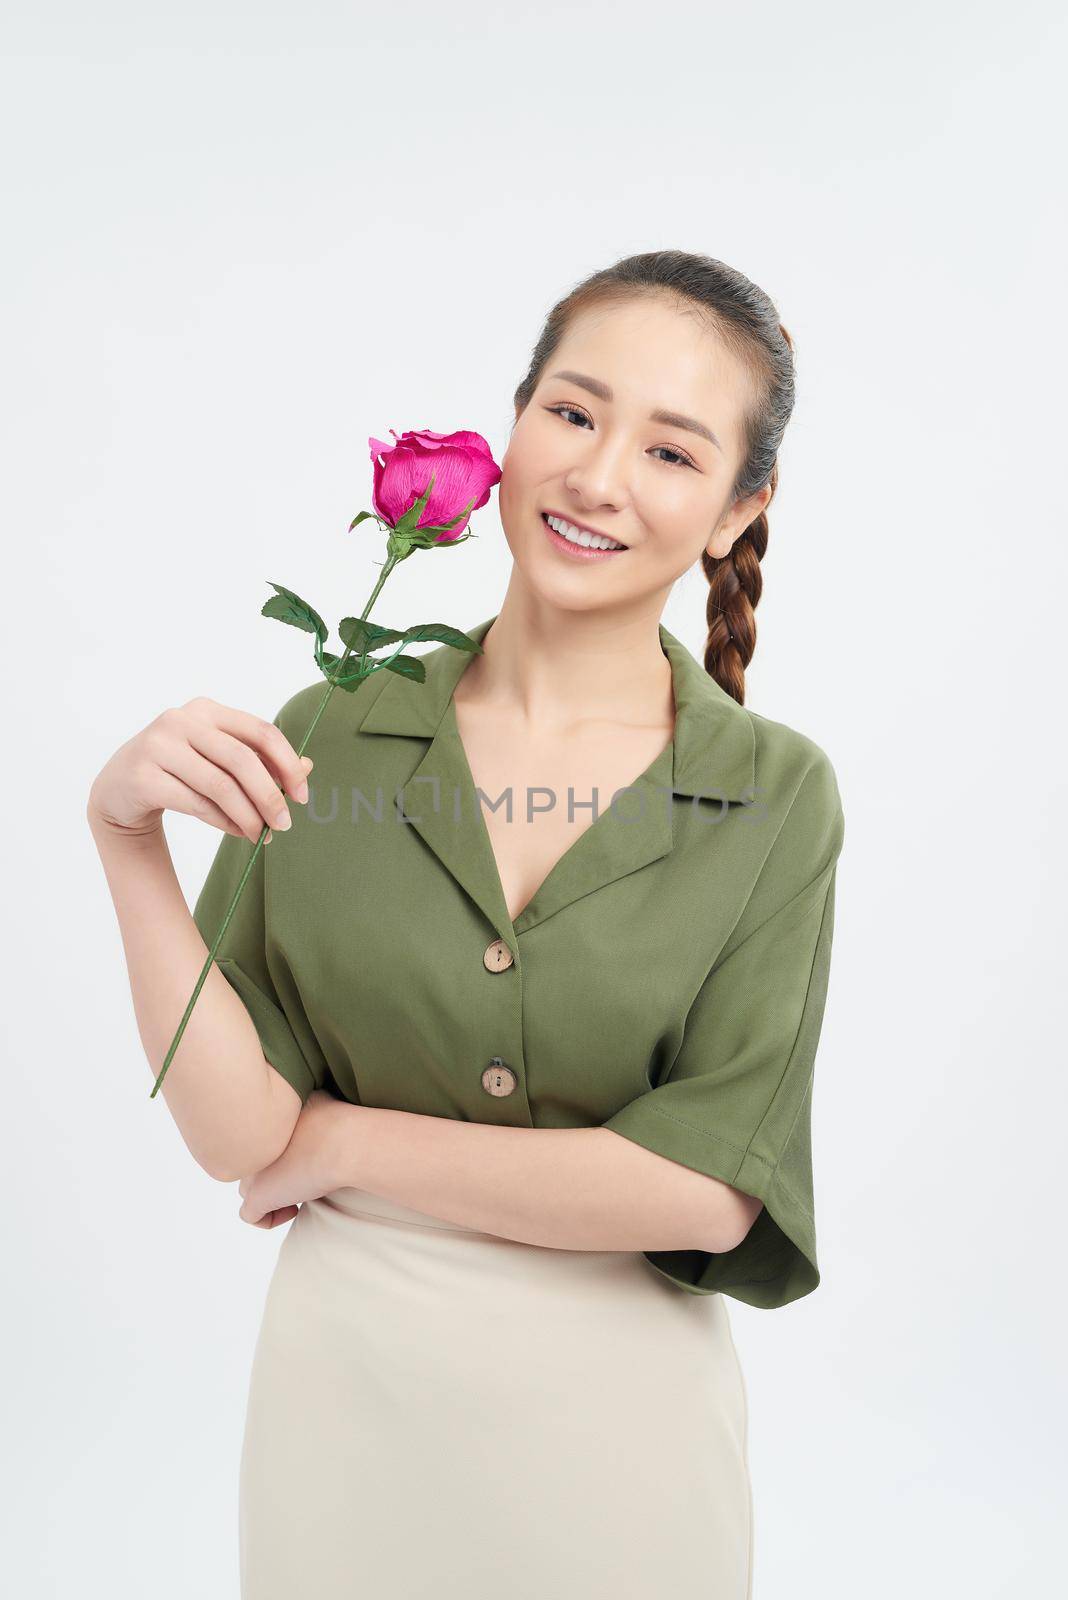 Young woman holding a single stem rose